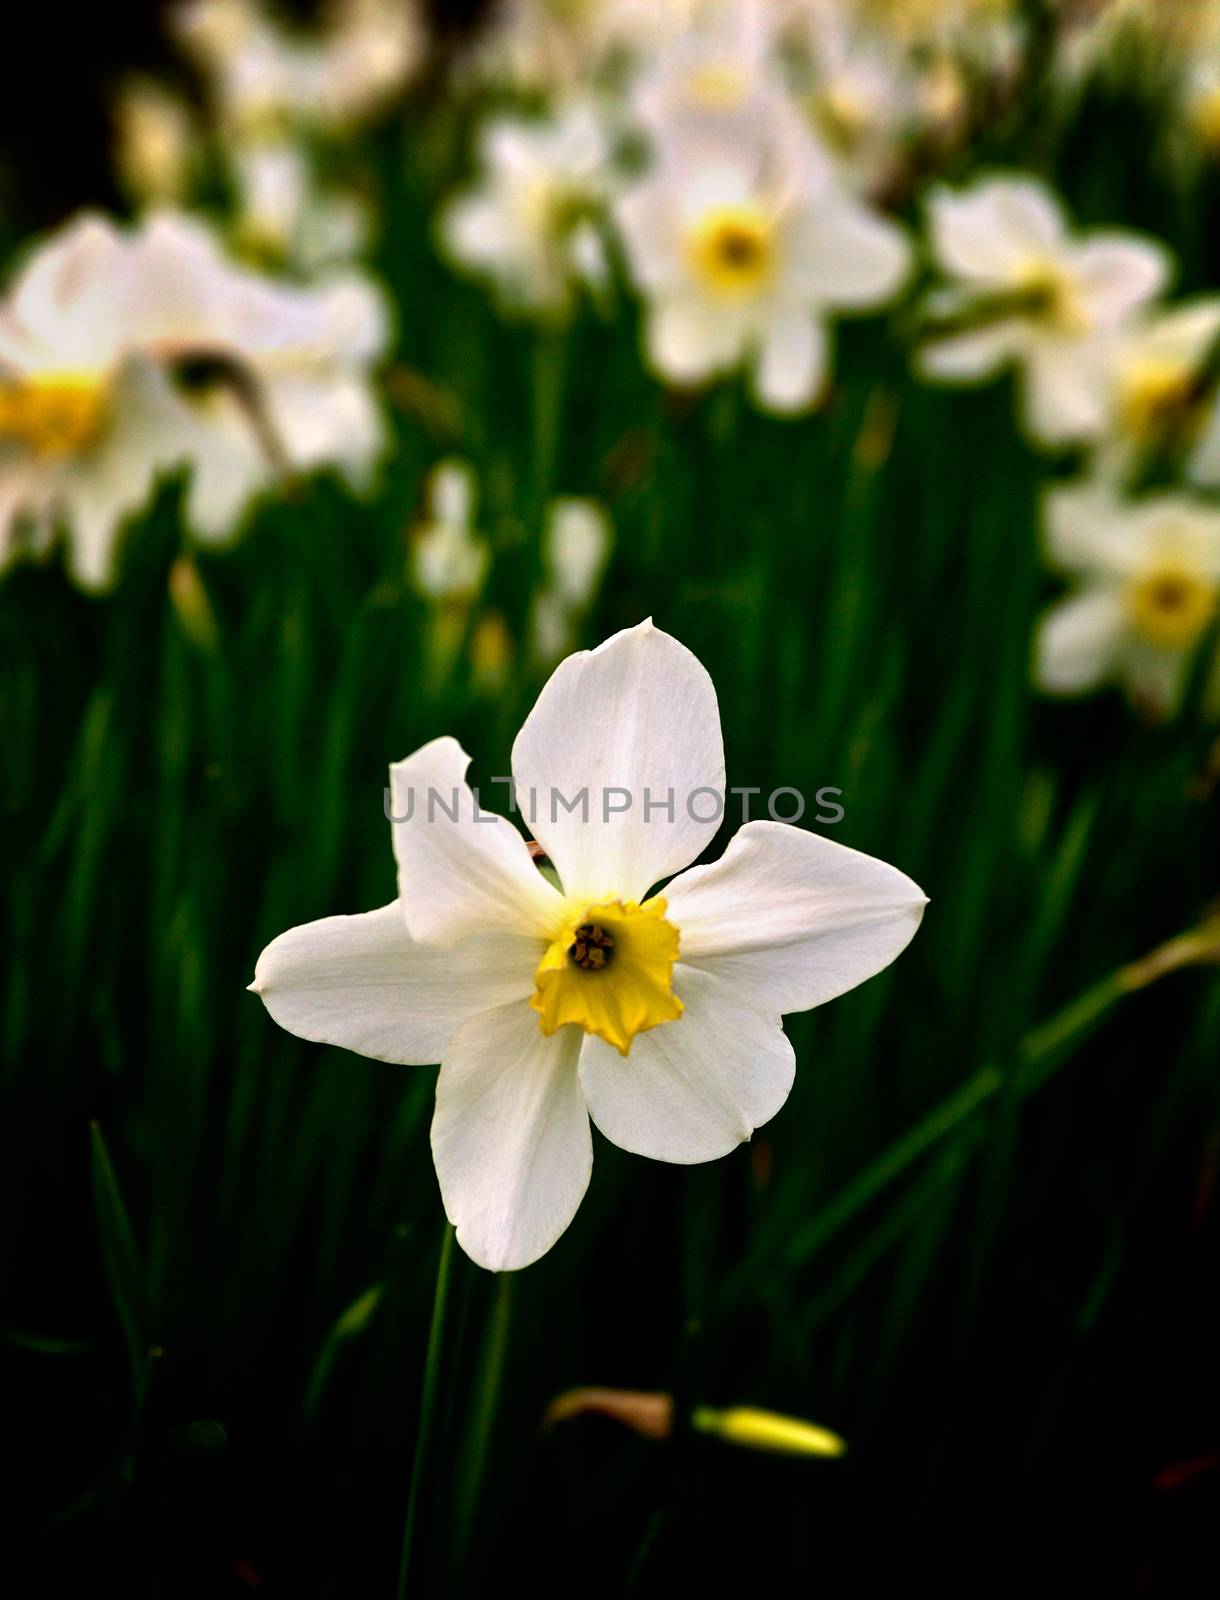 Beauty White Spring Daffodil closeup in Natural Environment on Blurred Daffodils background